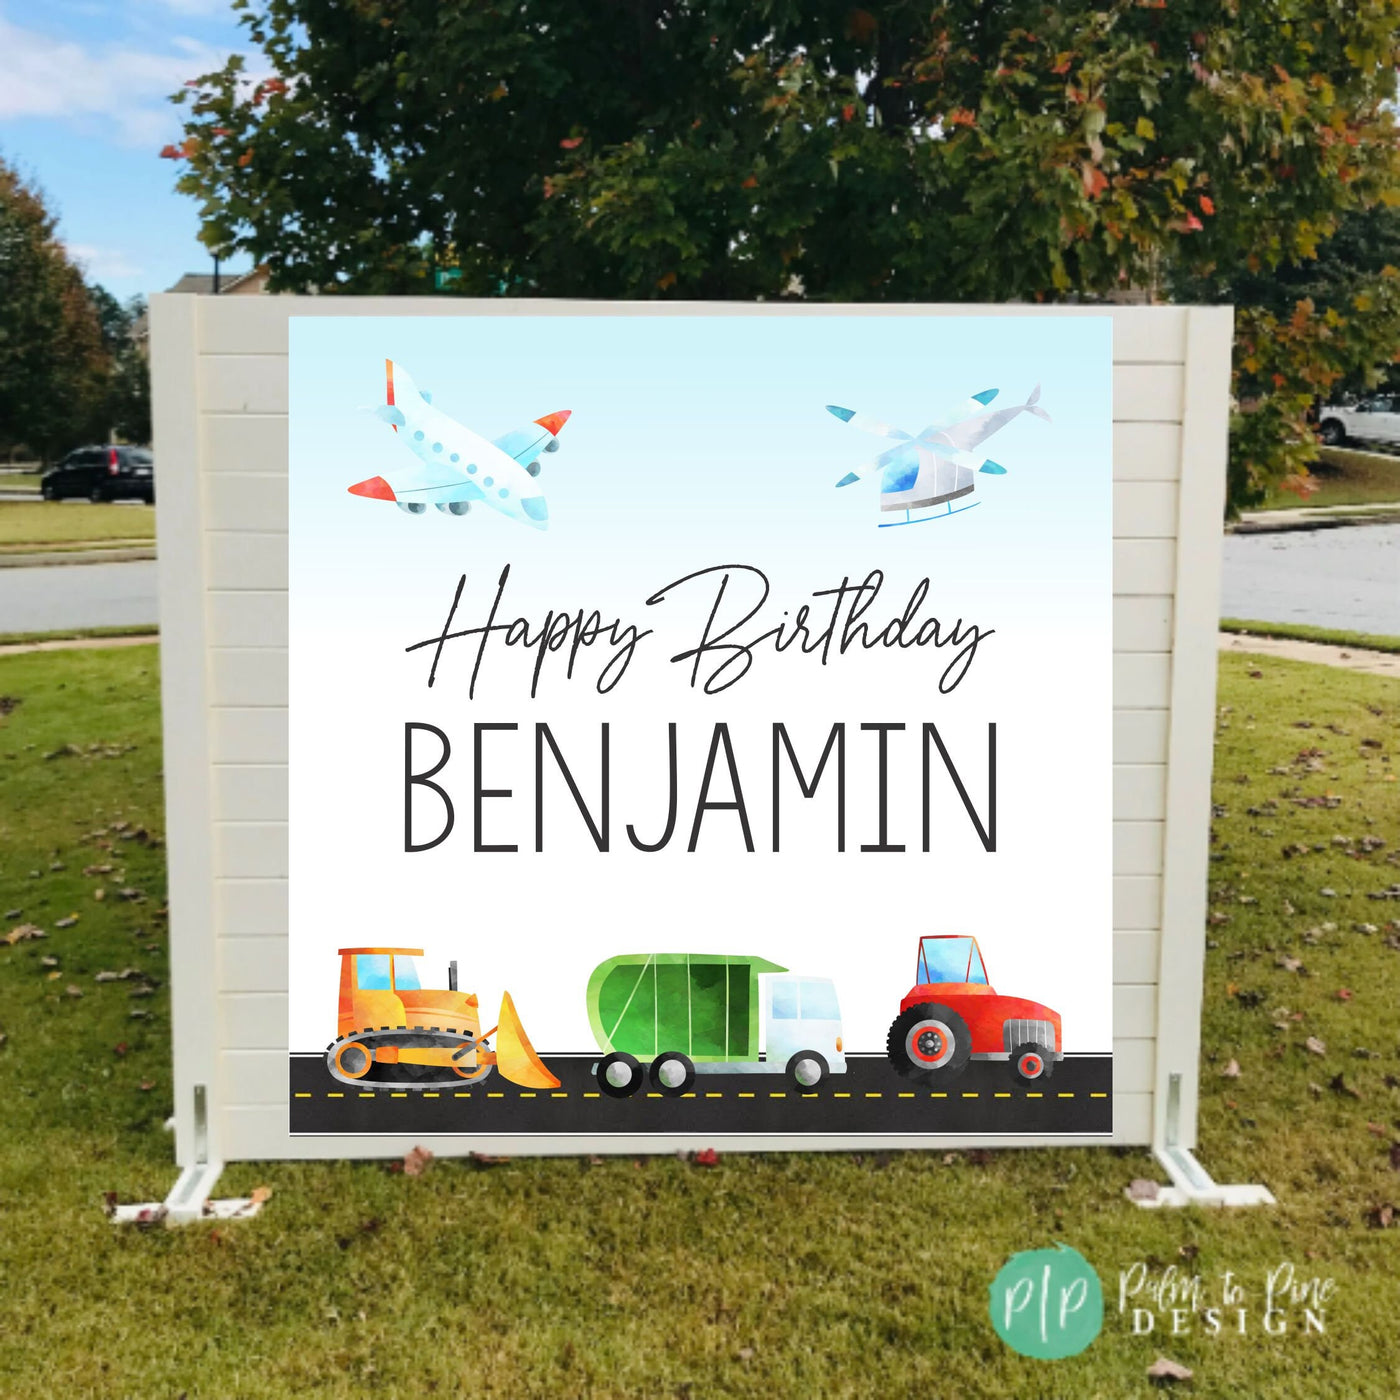 Things that Go Backdrop, Transportation Birthday Banner, Boys Vehicles Birthday Backdrop, Transportation Step & Repeat Banner, Vehicles Sign